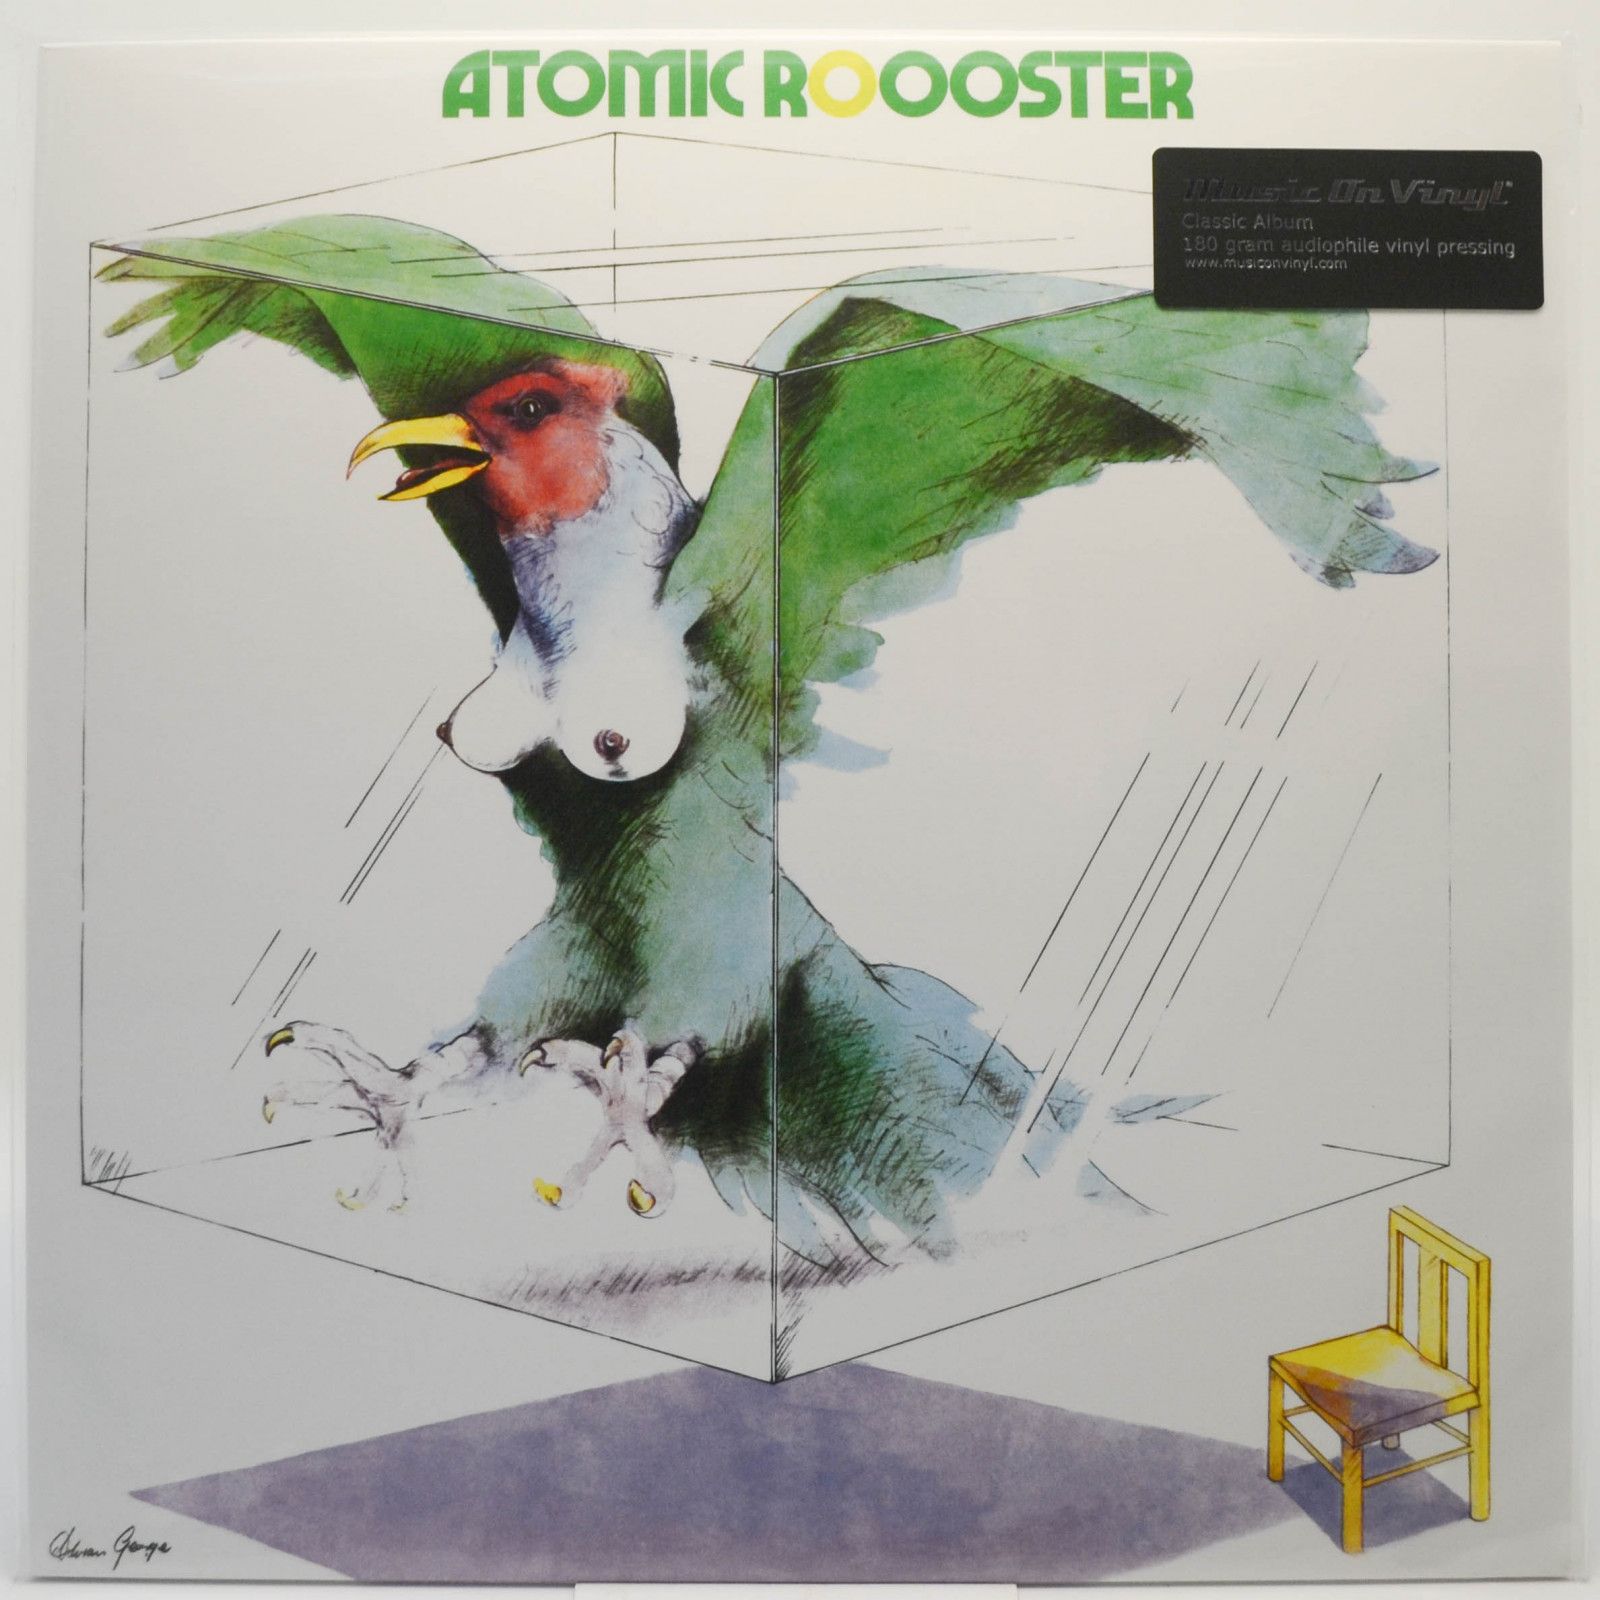 Atomic Rooster — Atomic Rooster, 1970